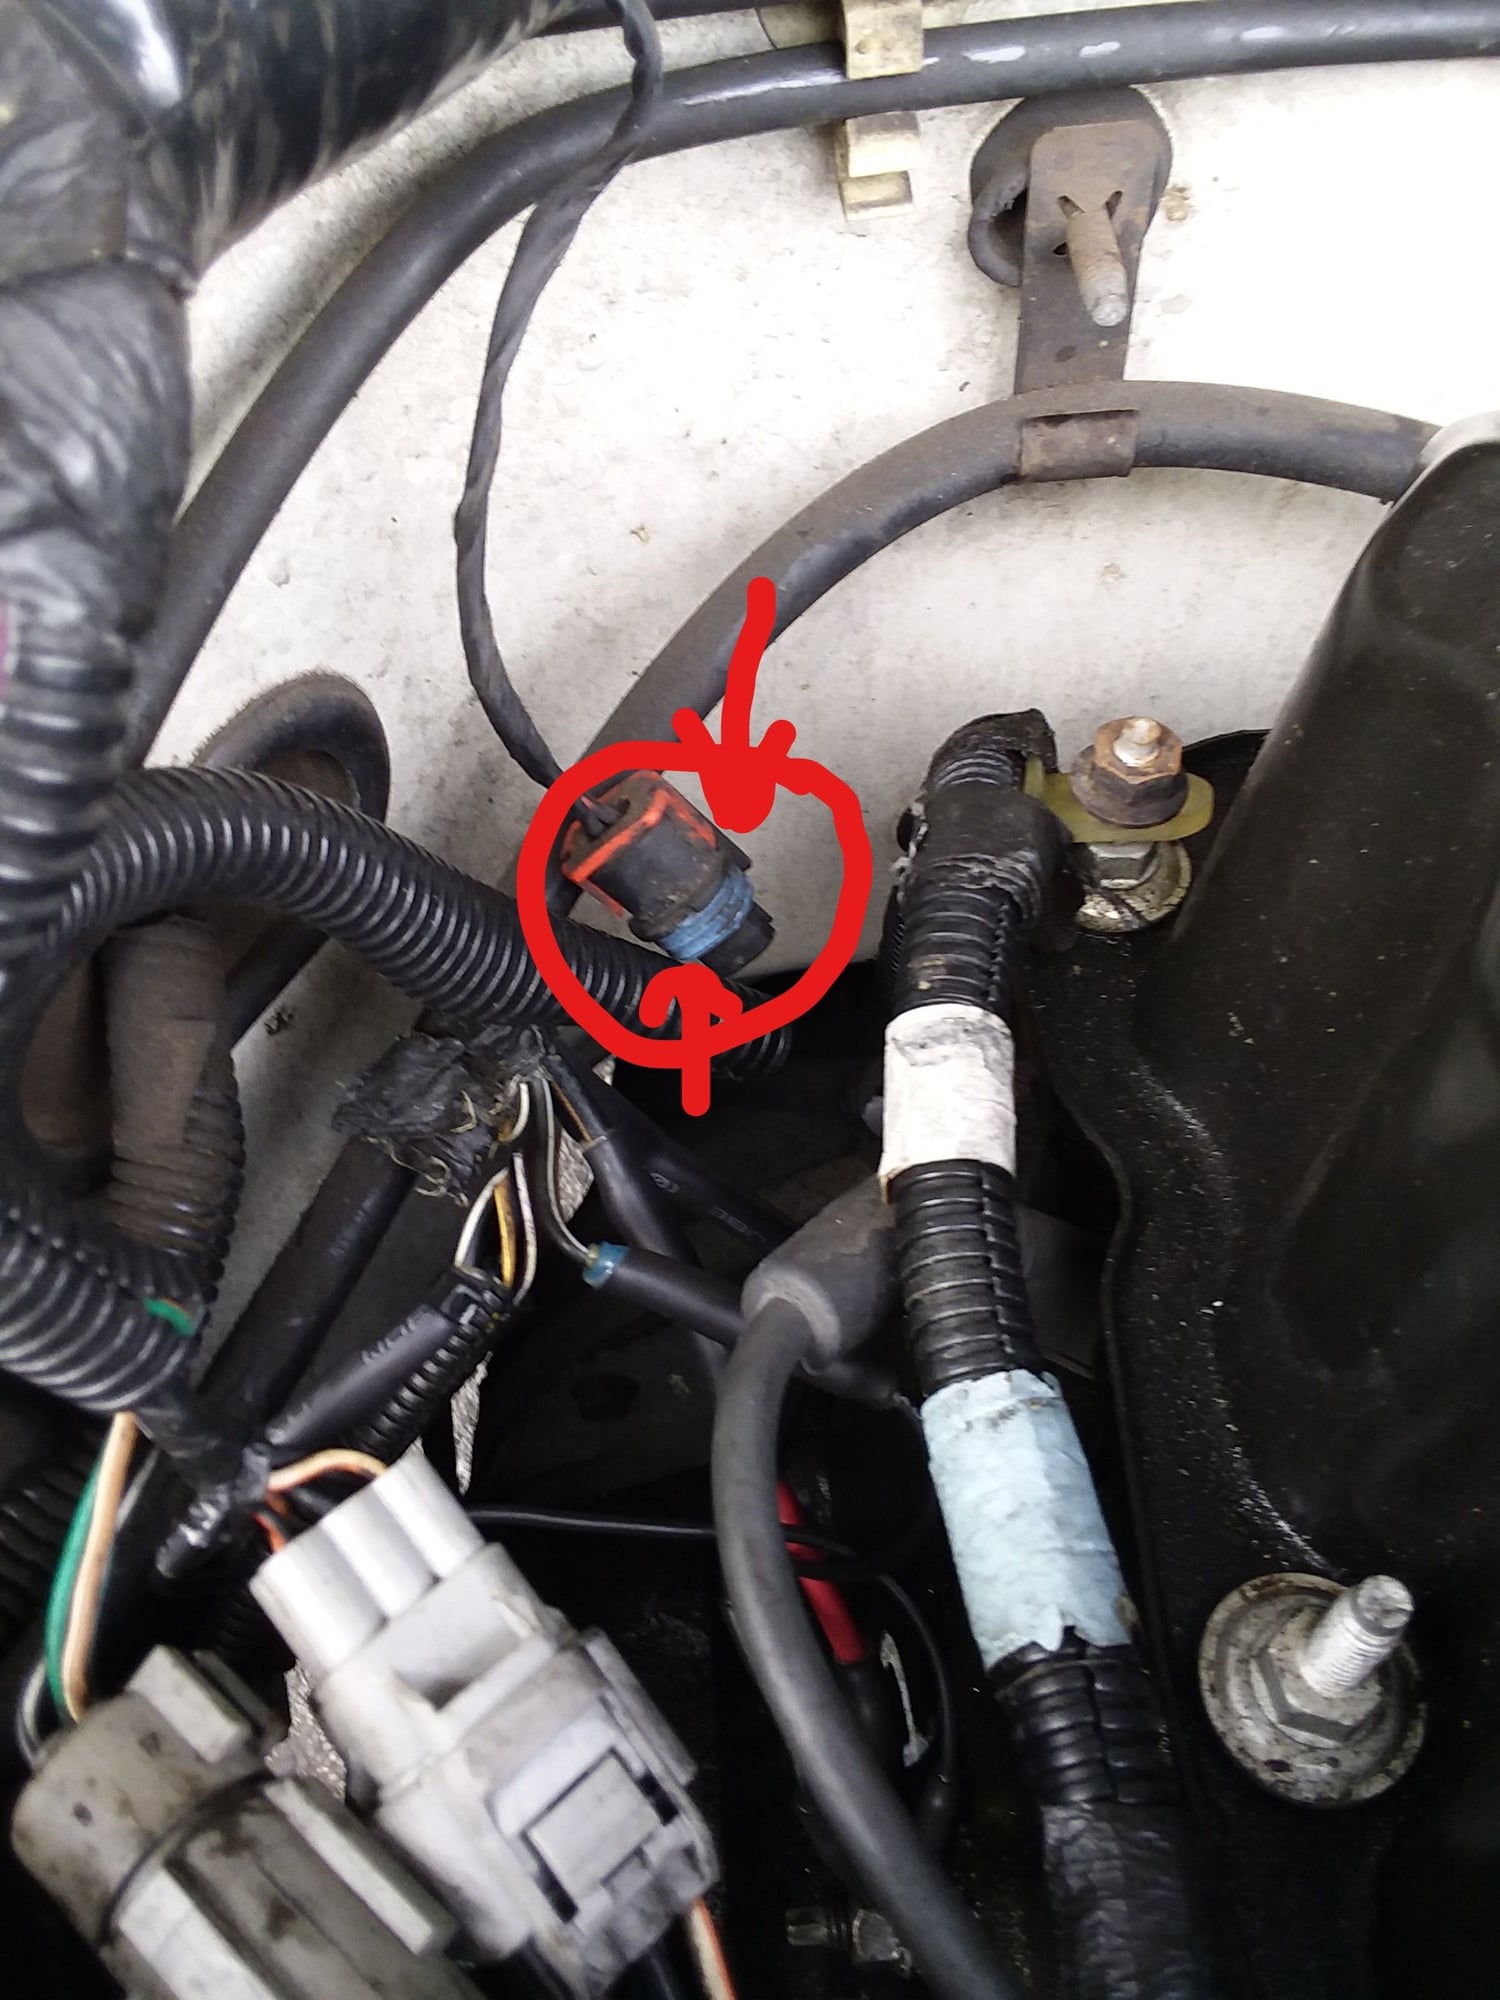 Where does one get these gaskets? Jeep Cherokee Forum